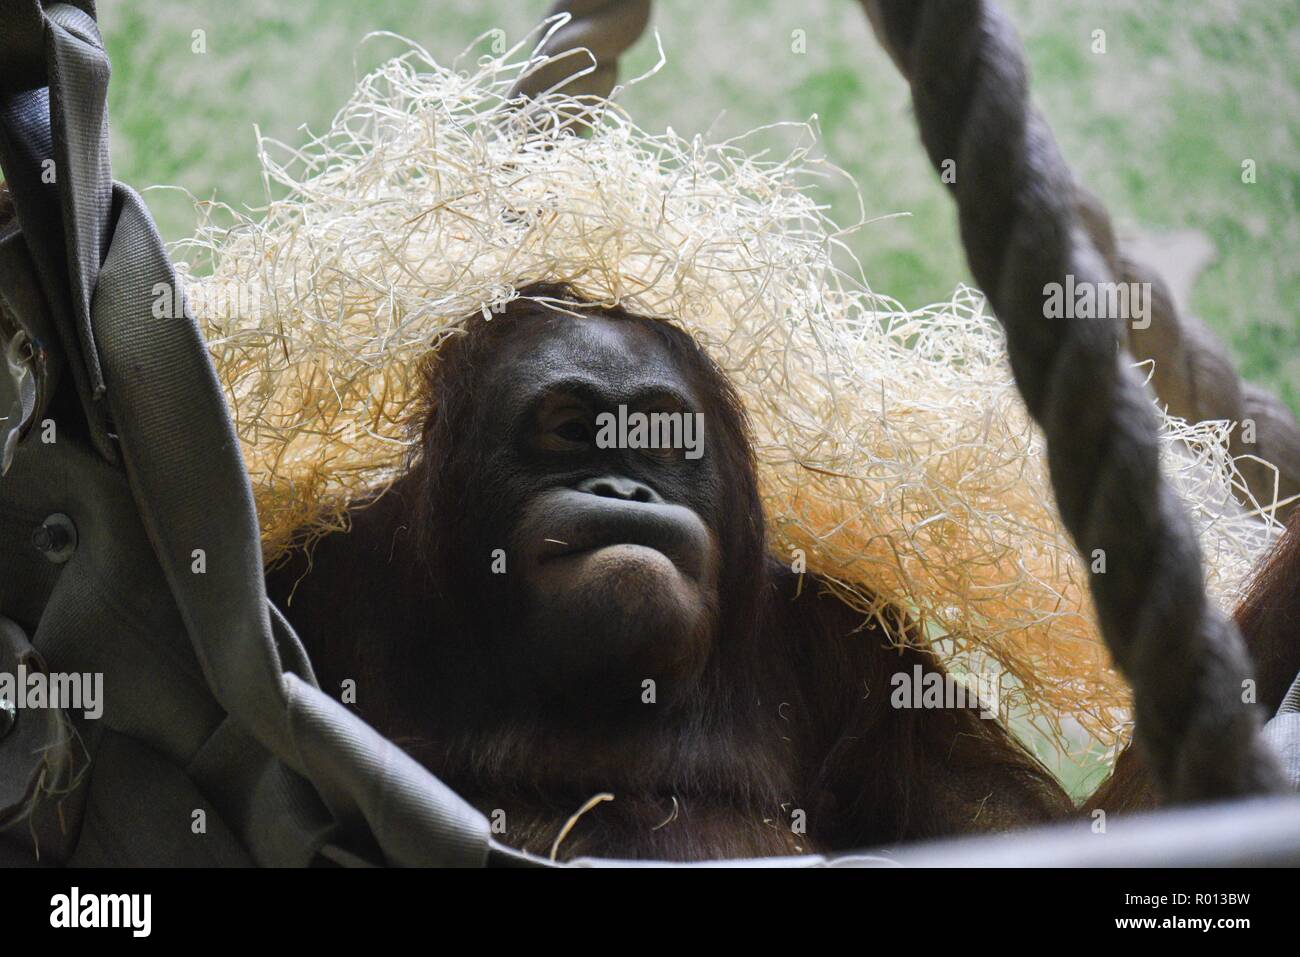 October 26, 2018 - Paris, France: An orang-outan with straw on her head at the zoo of the French National Museum of Natural History. Une orang-outan avec de la paille sur sa tete a la menagerie du Jardin des Plantes. *** FRANCE OUT / NO SALES TO FRENCH MEDIA *** Stock Photo